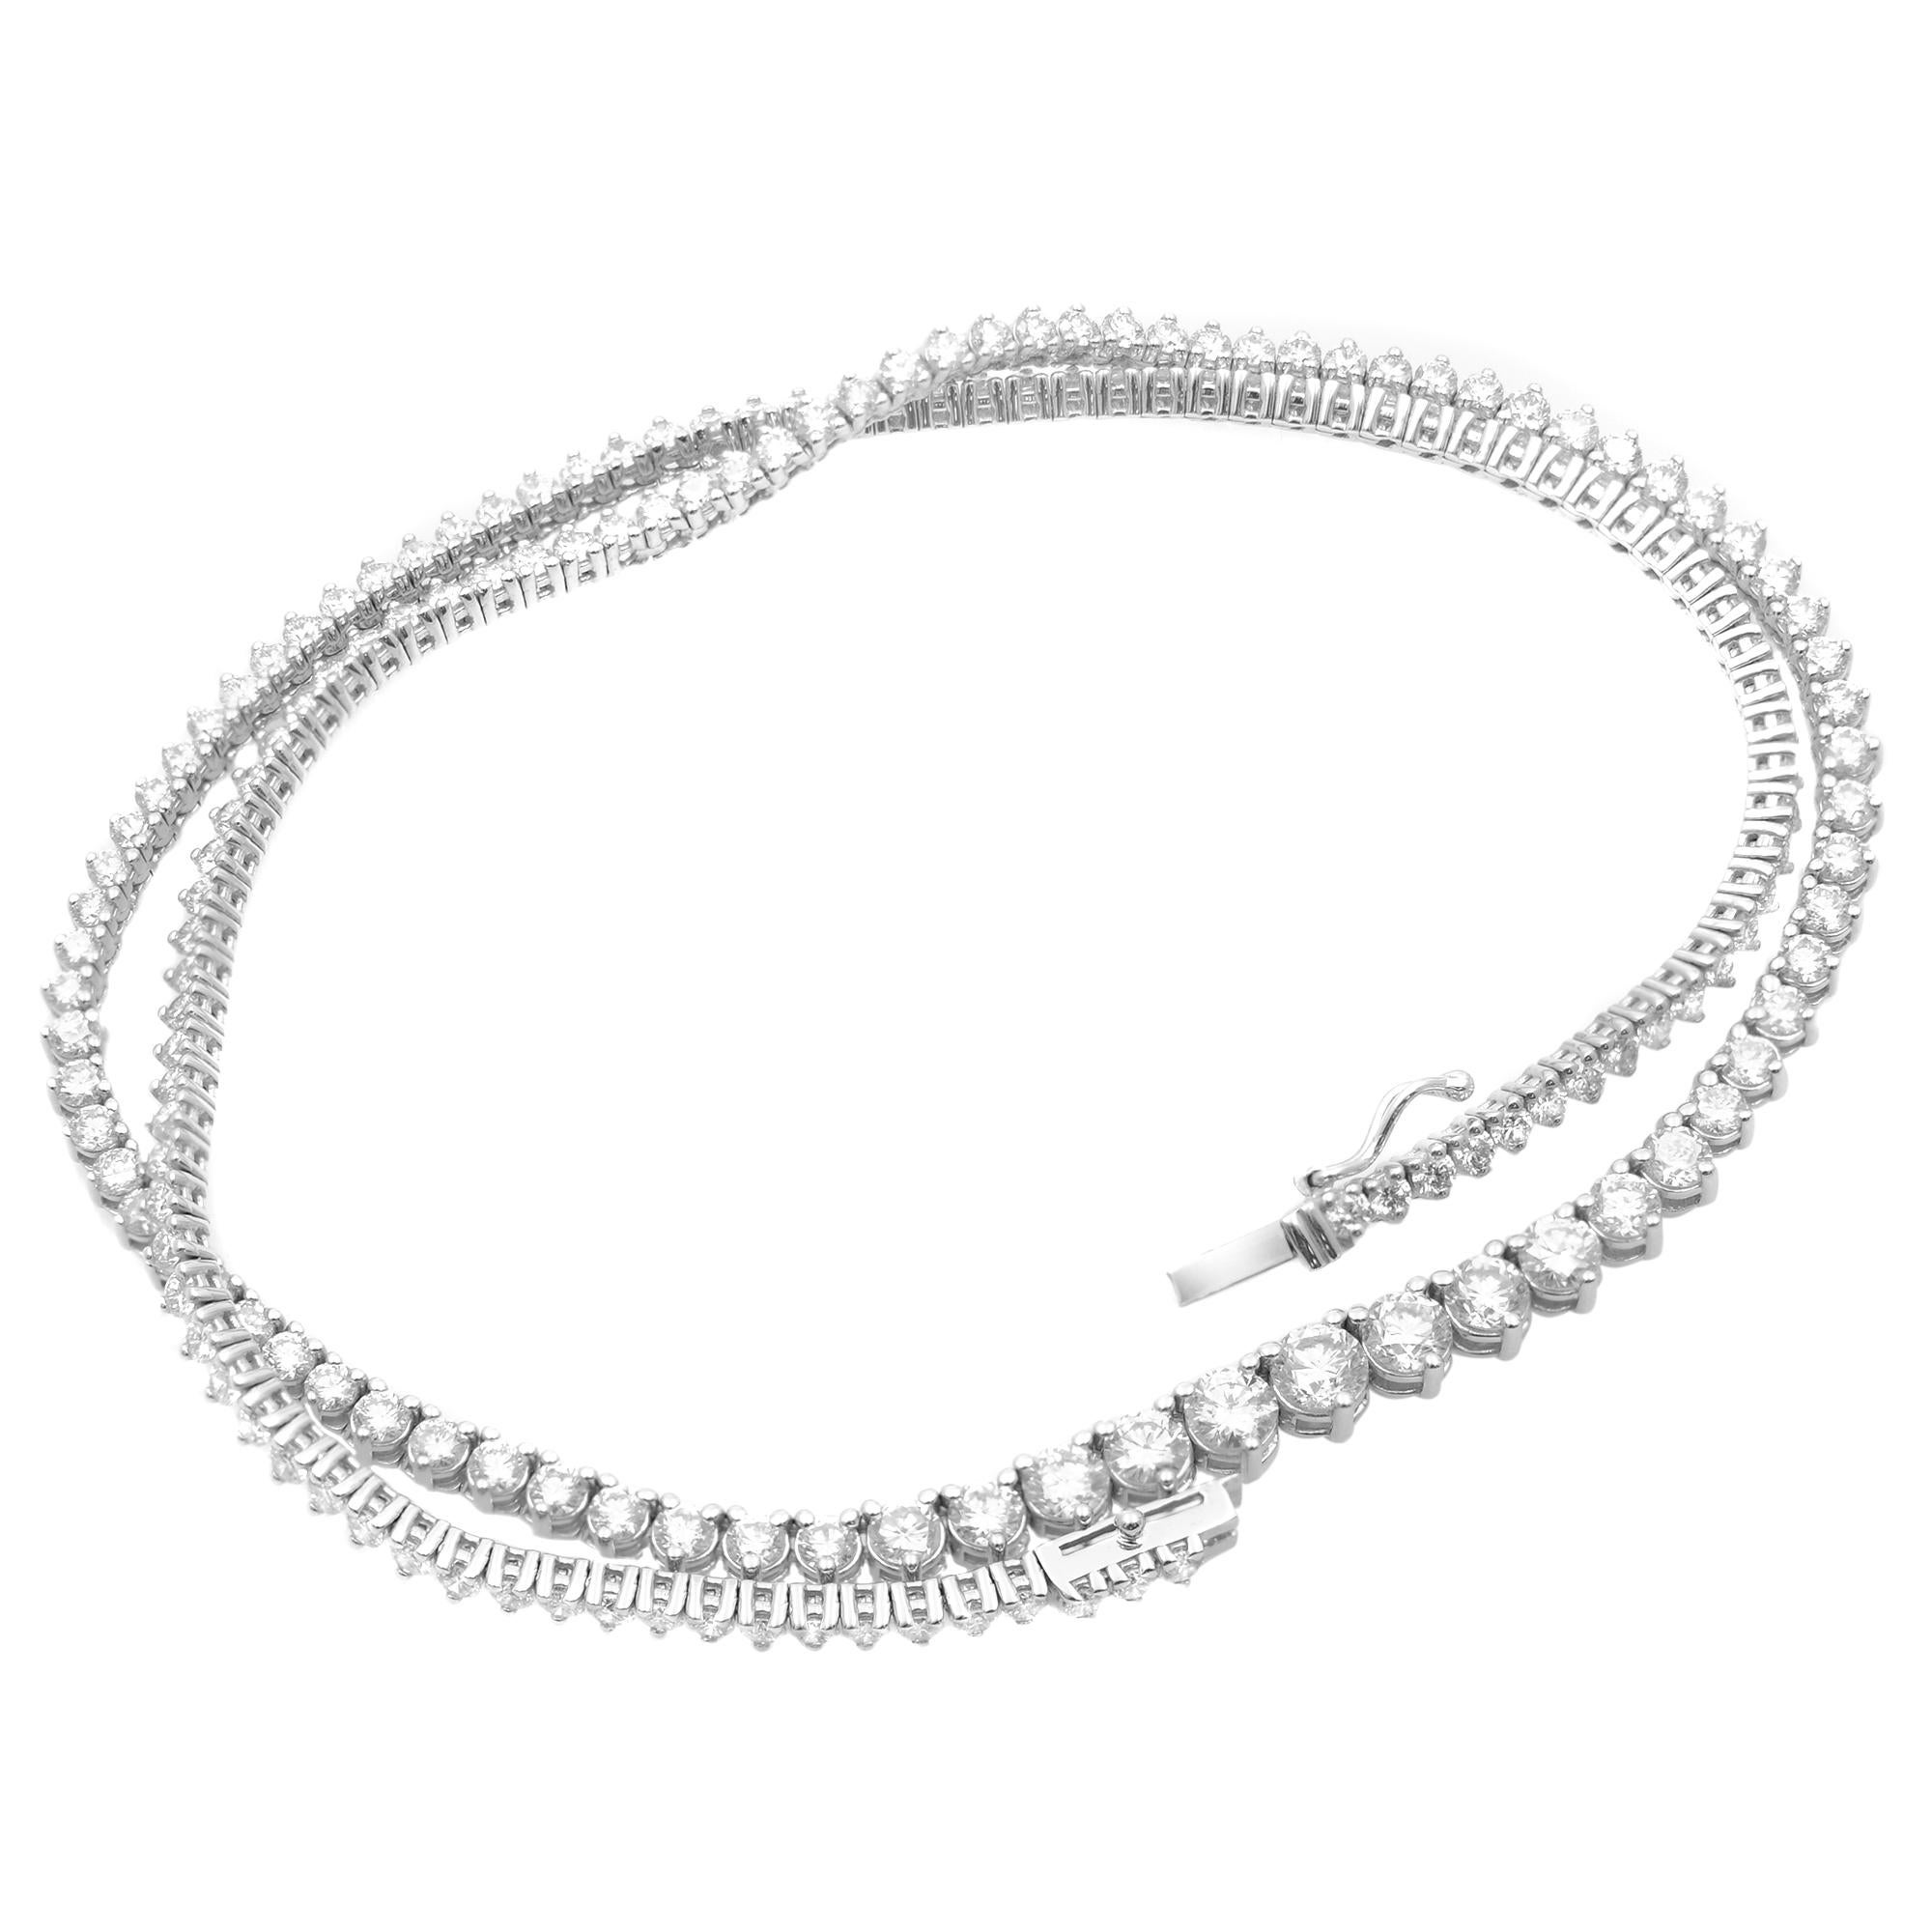 Rachel Koen 14K White Gold Graduated Round Cut Diamond Tennis Necklace 10.00cttw In New Condition For Sale In New York, NY